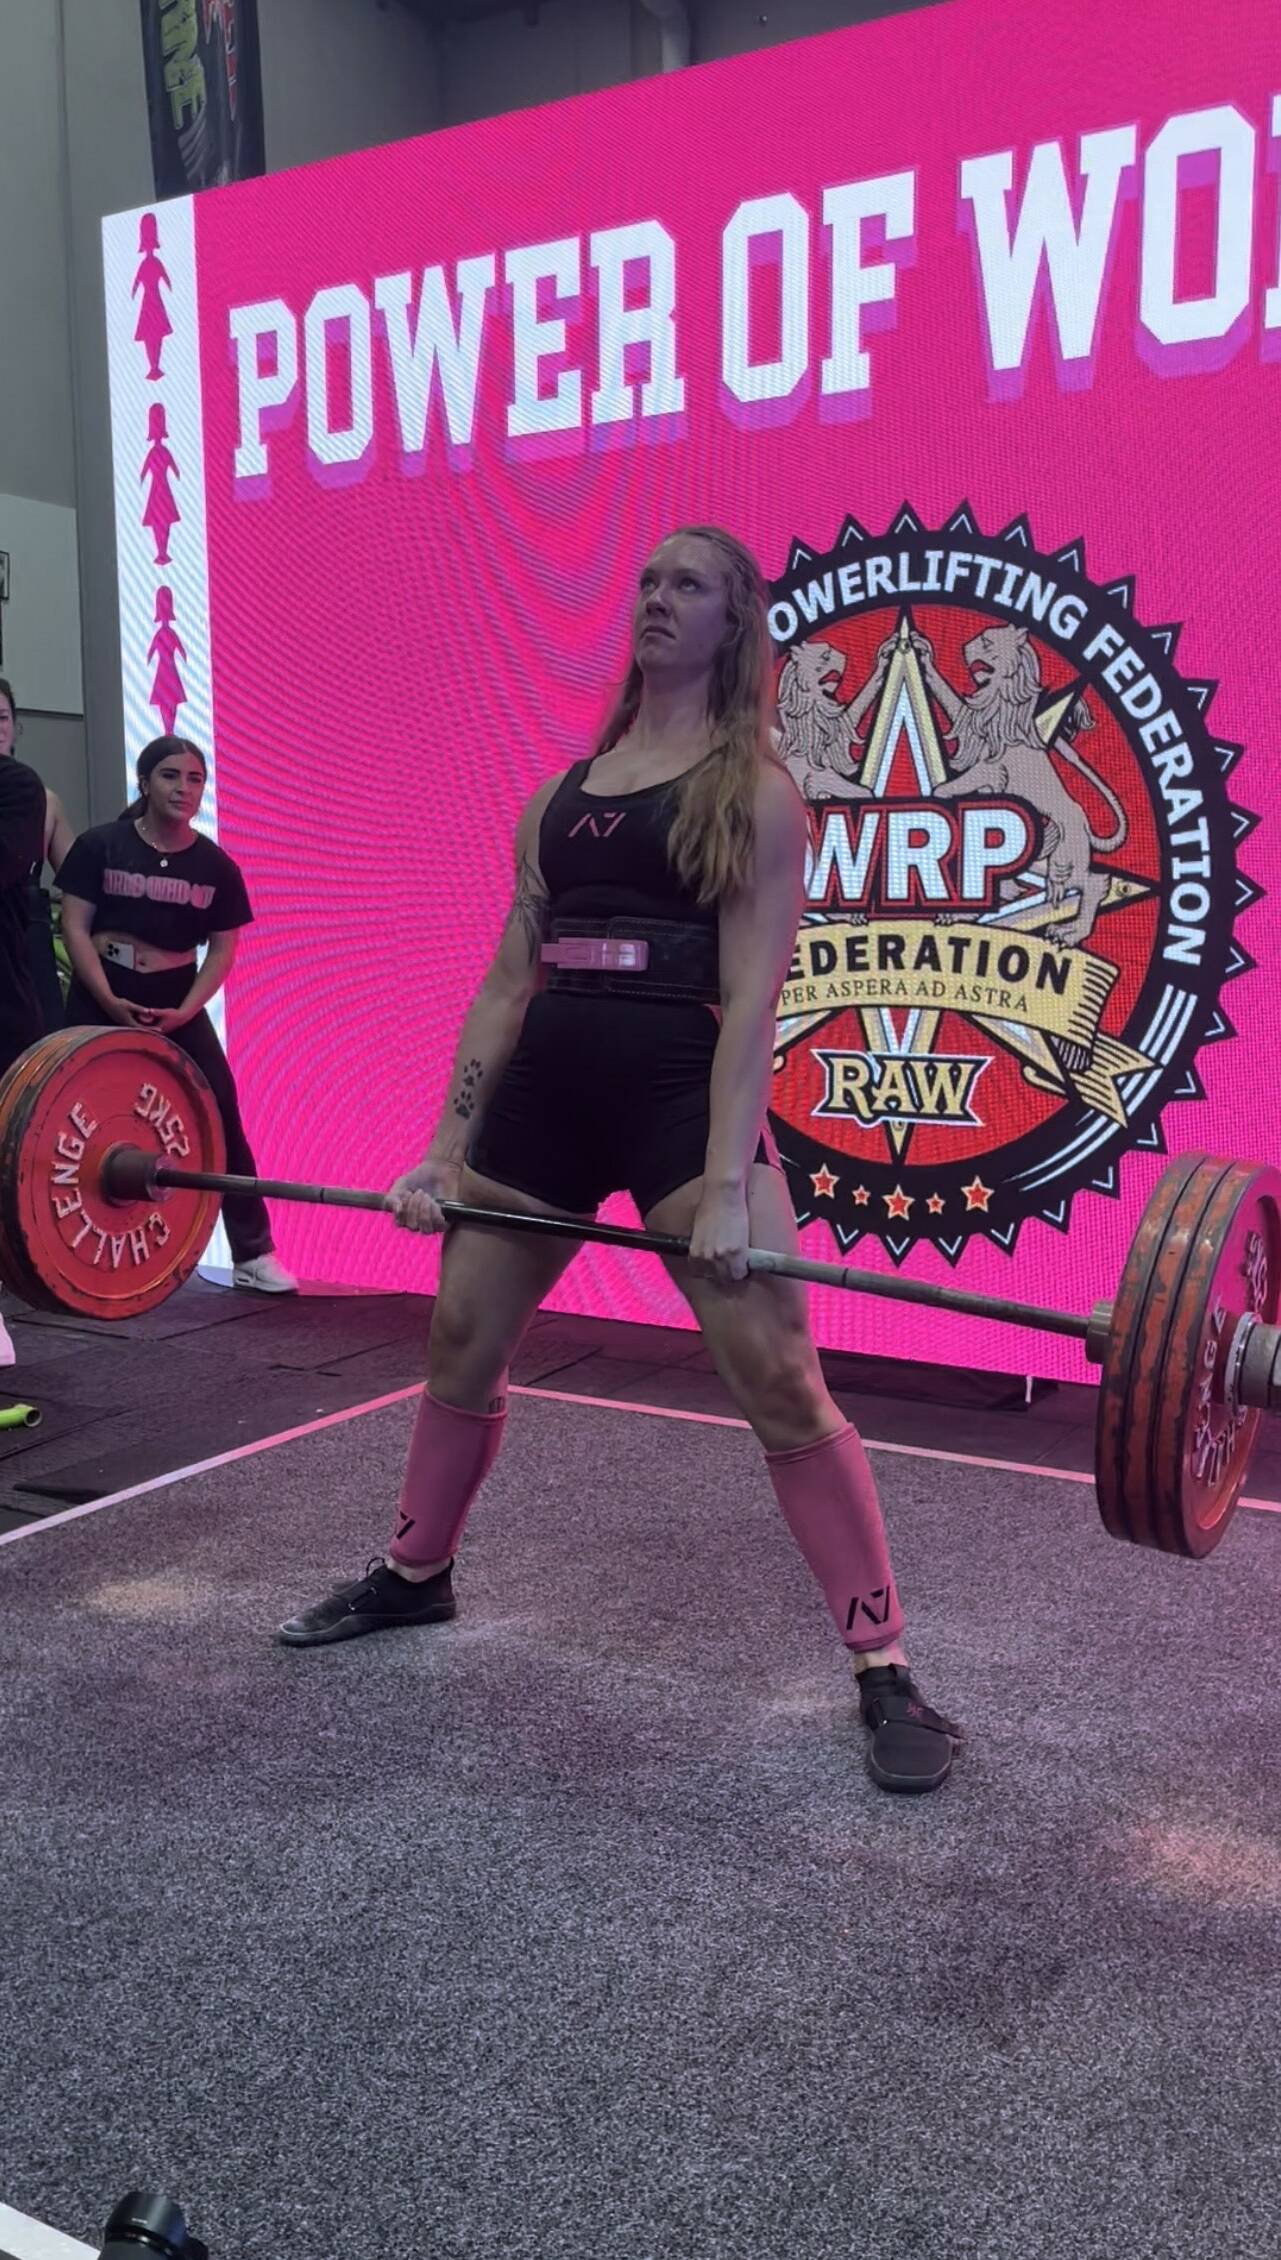 16-year-old Highland powerlifter sets world record